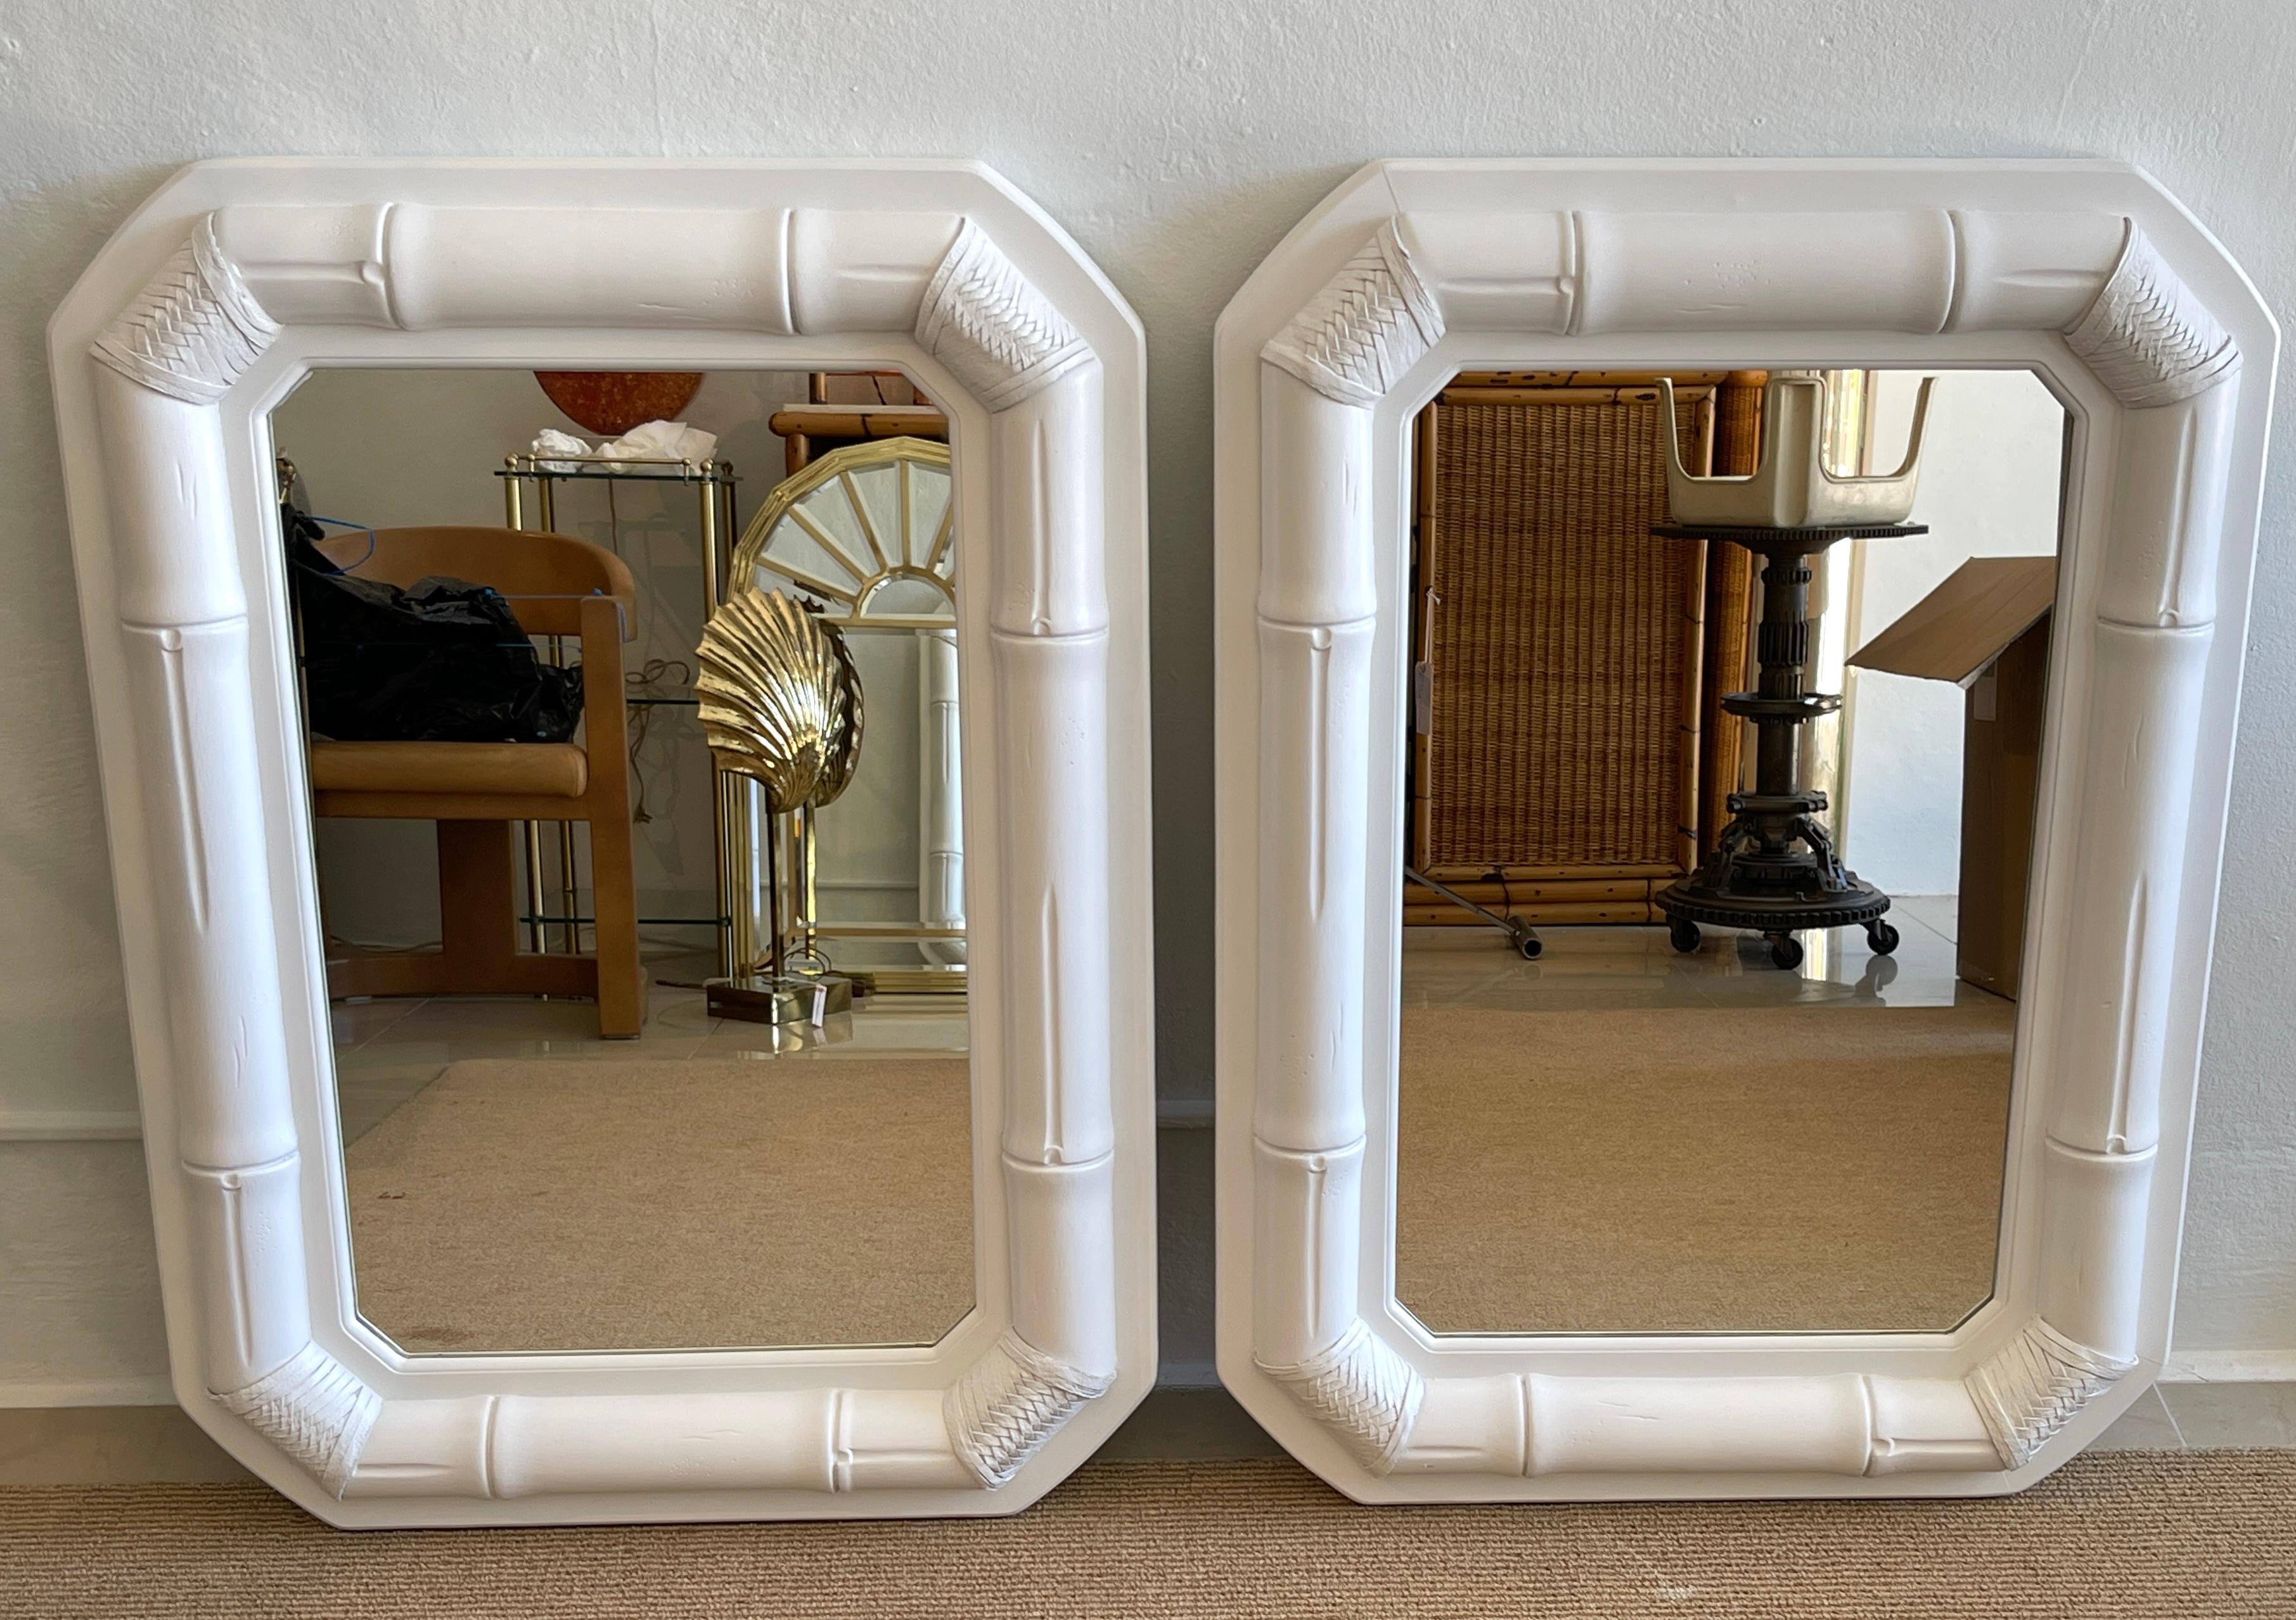 70s Coastal Modern White Lacquered bamboo & leather wrapped mirror, 2 Available, Sold Individually

Each one mounted with a continuous bamboo surround with leather wrapped corners, with an inset mirror measures 18-Inches wide x 29-Inches